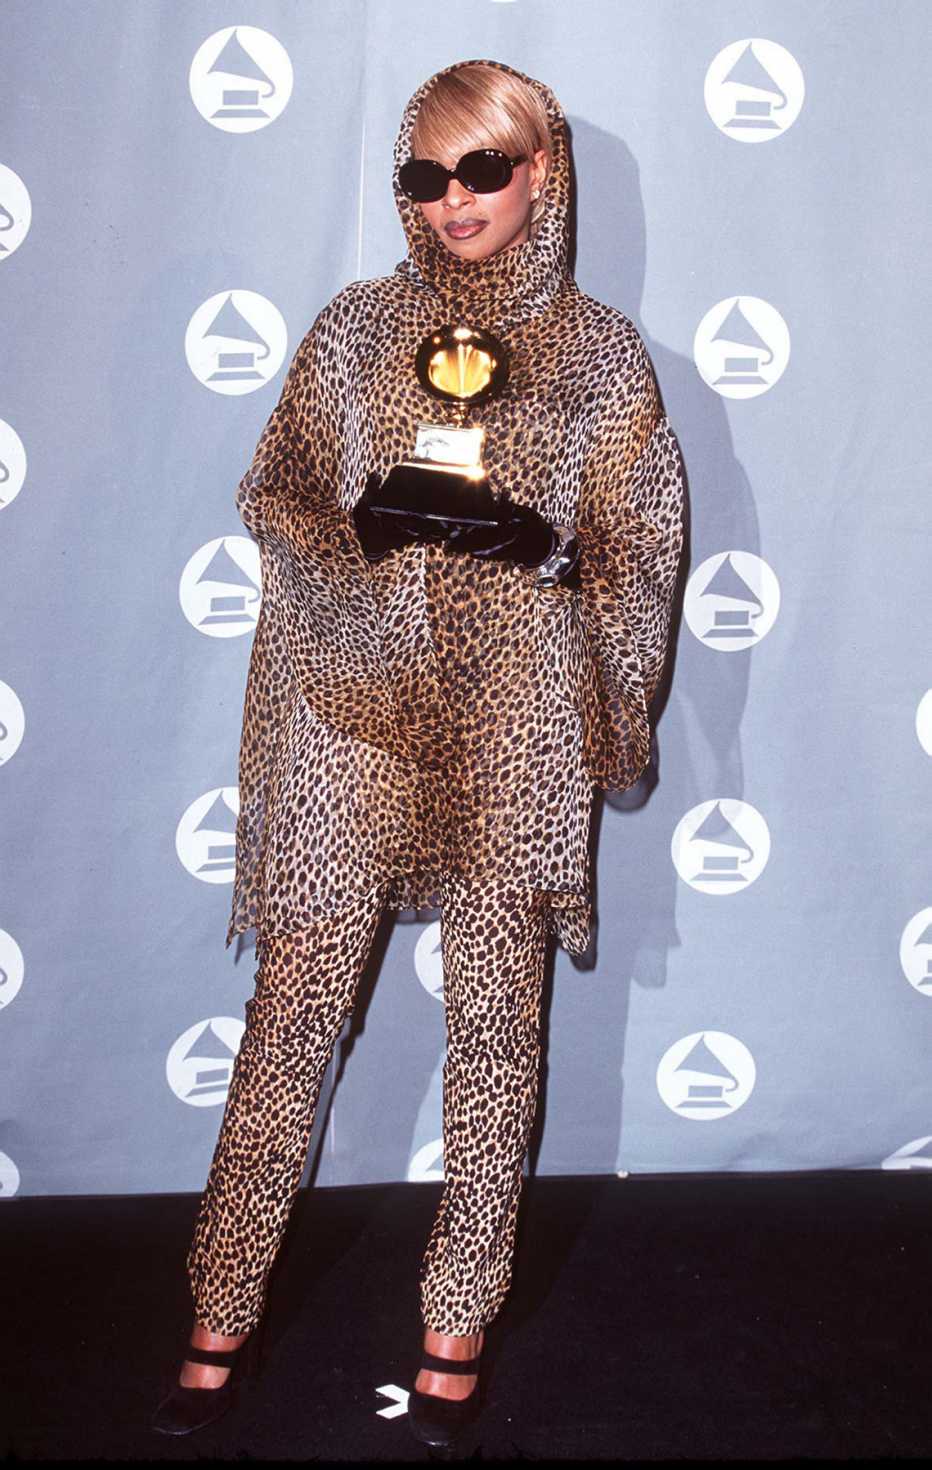 Mary J. Blige holding her Grammy at the 38th Annual Grammy Awards